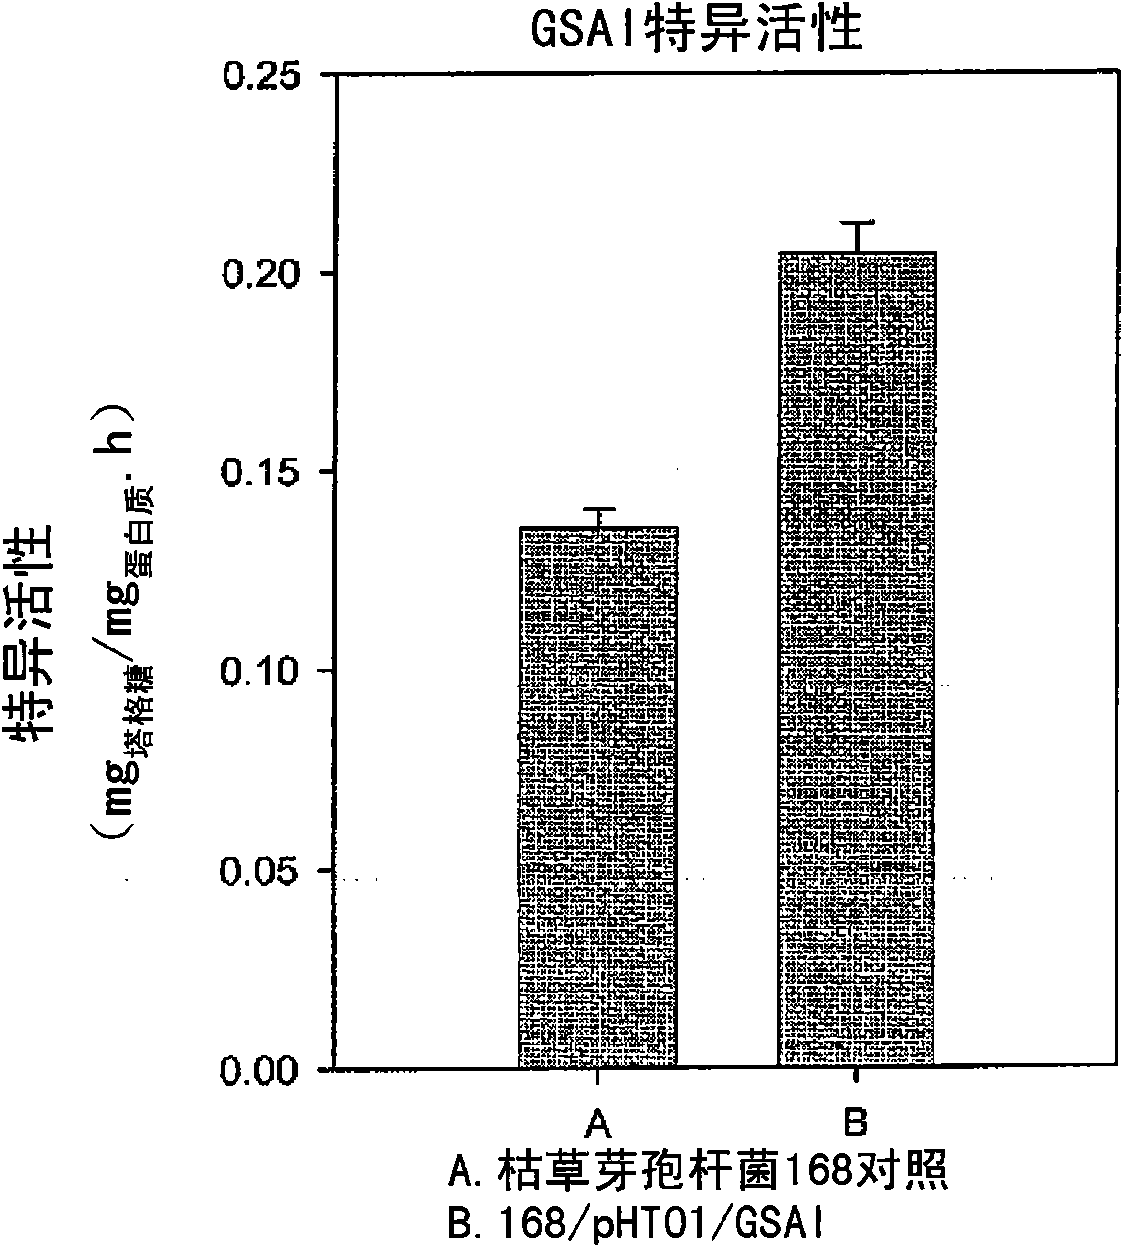 Food grade thermophilic arabinose isomerase expressed from gras, and tagatose manufacturing method by using it